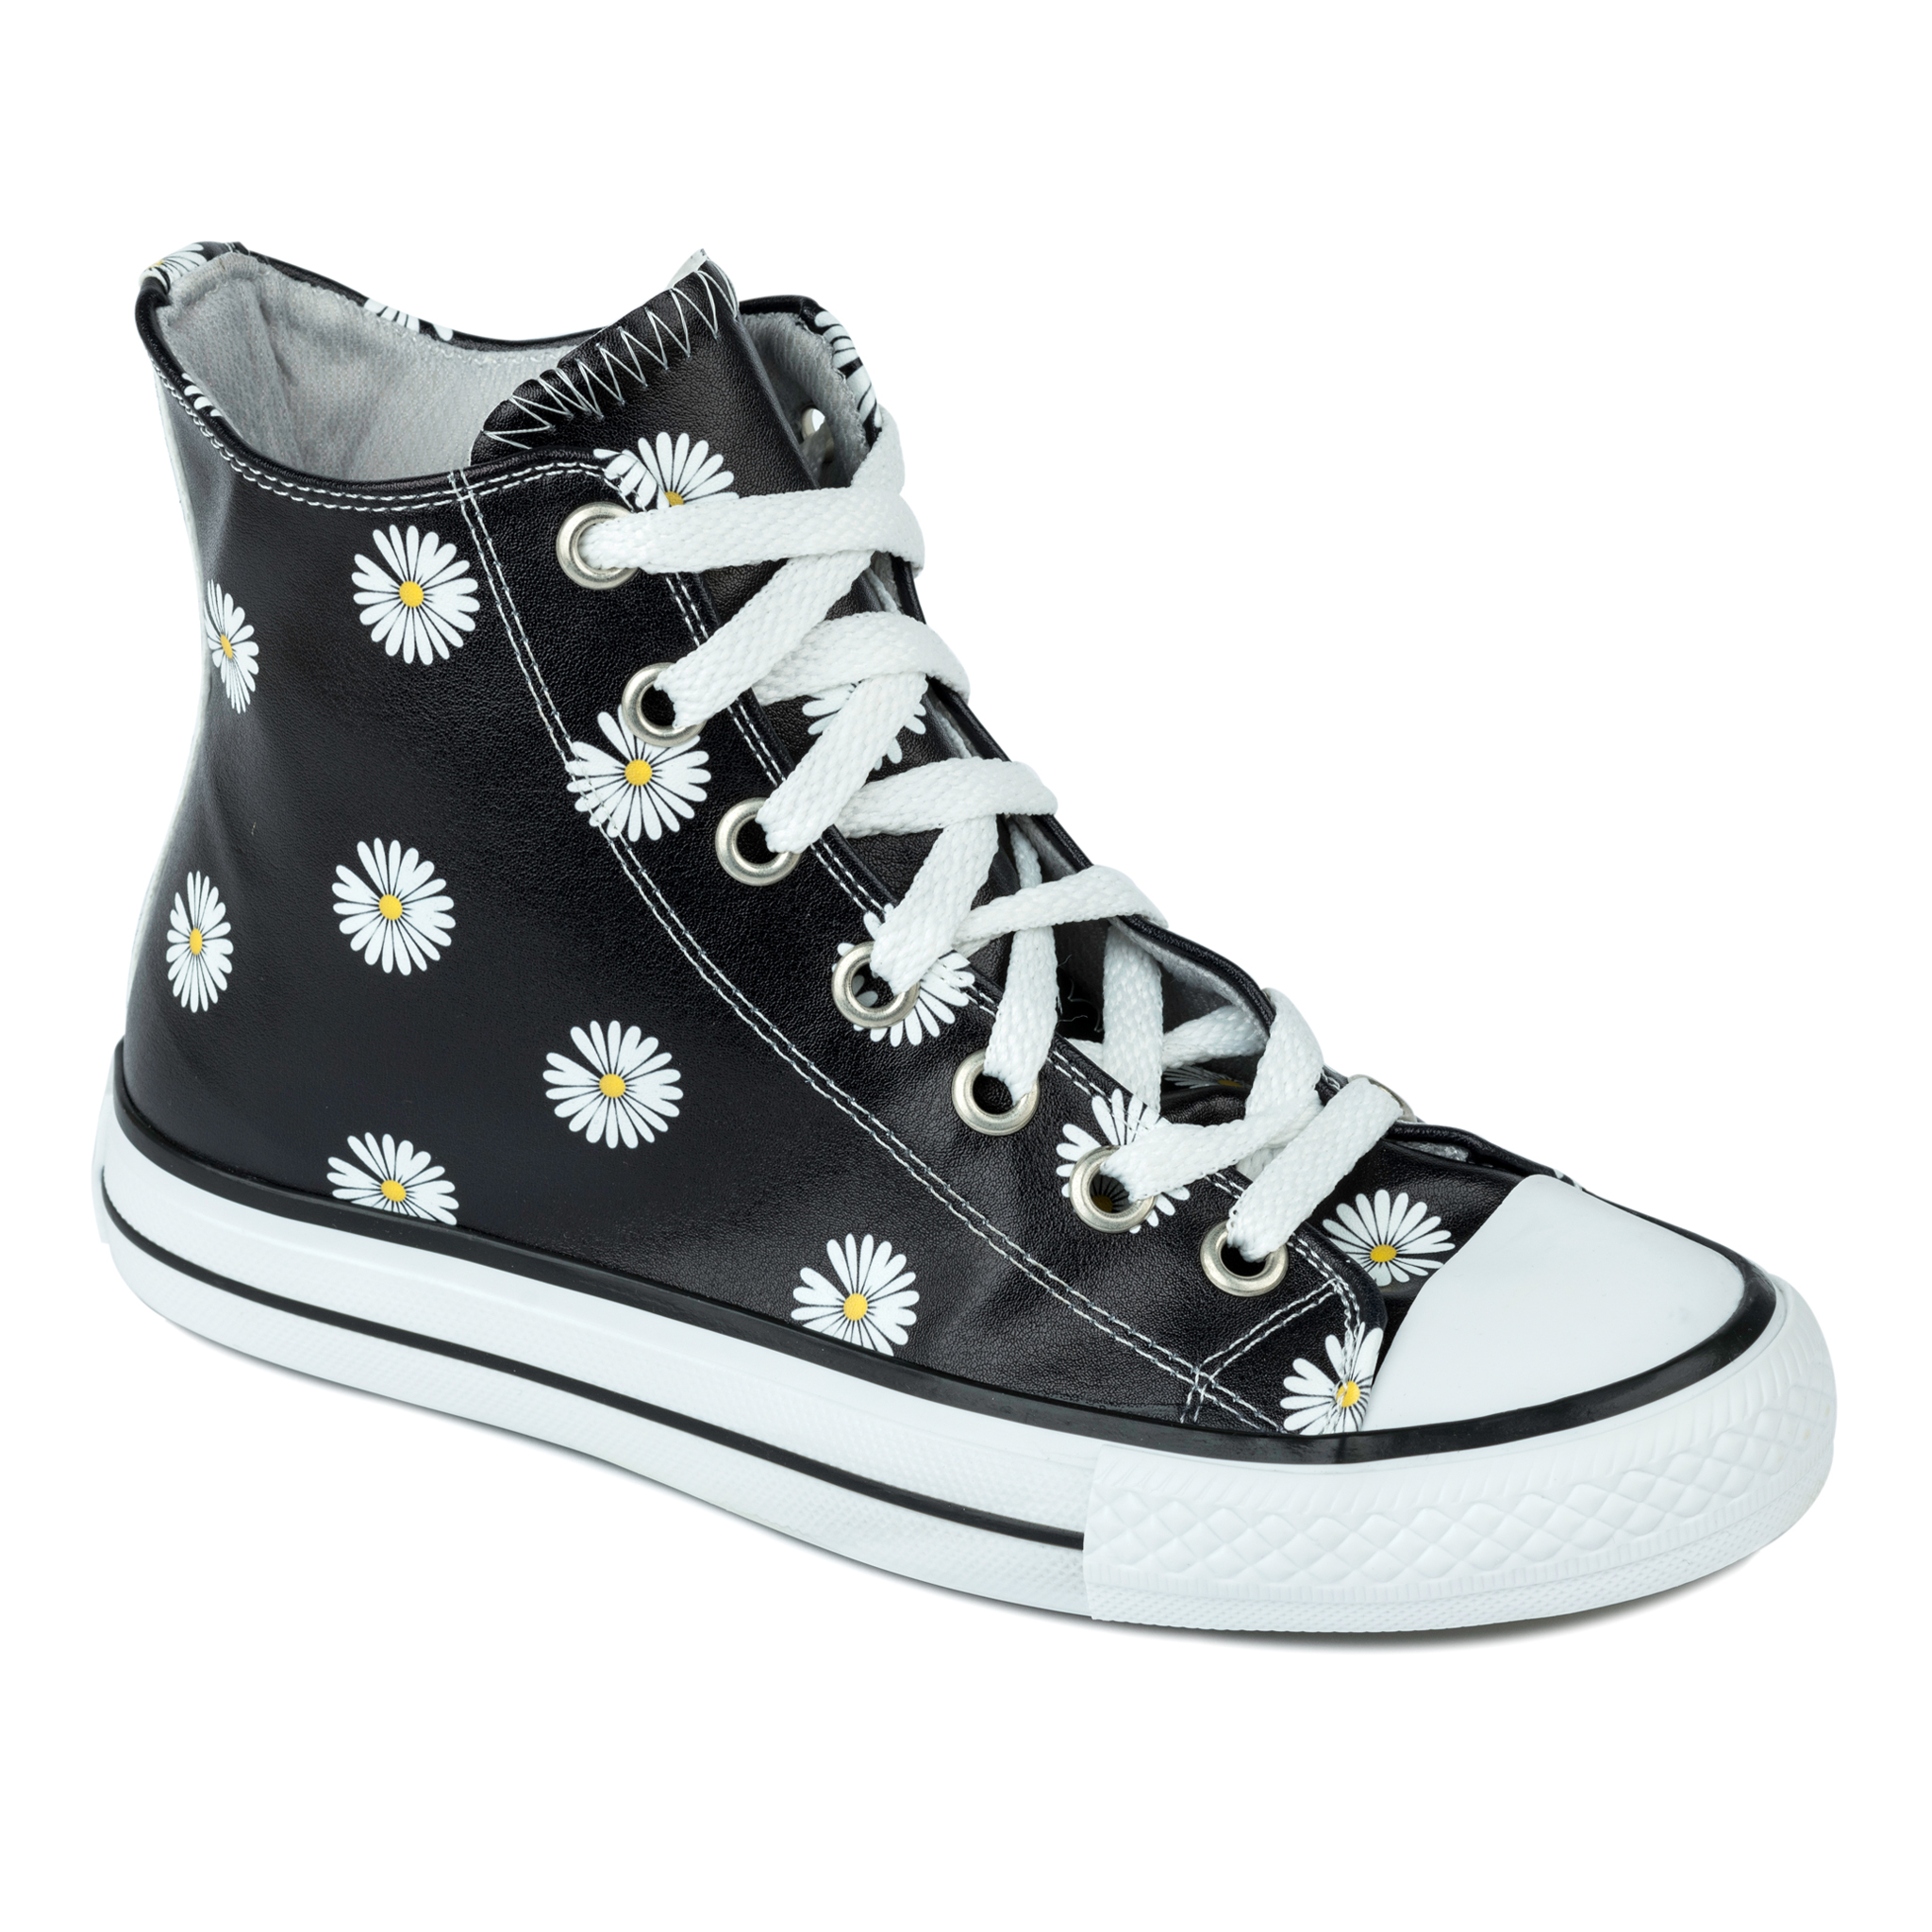 ANKLE SNEAKERS WITH FLOWER PRINT - BLACK